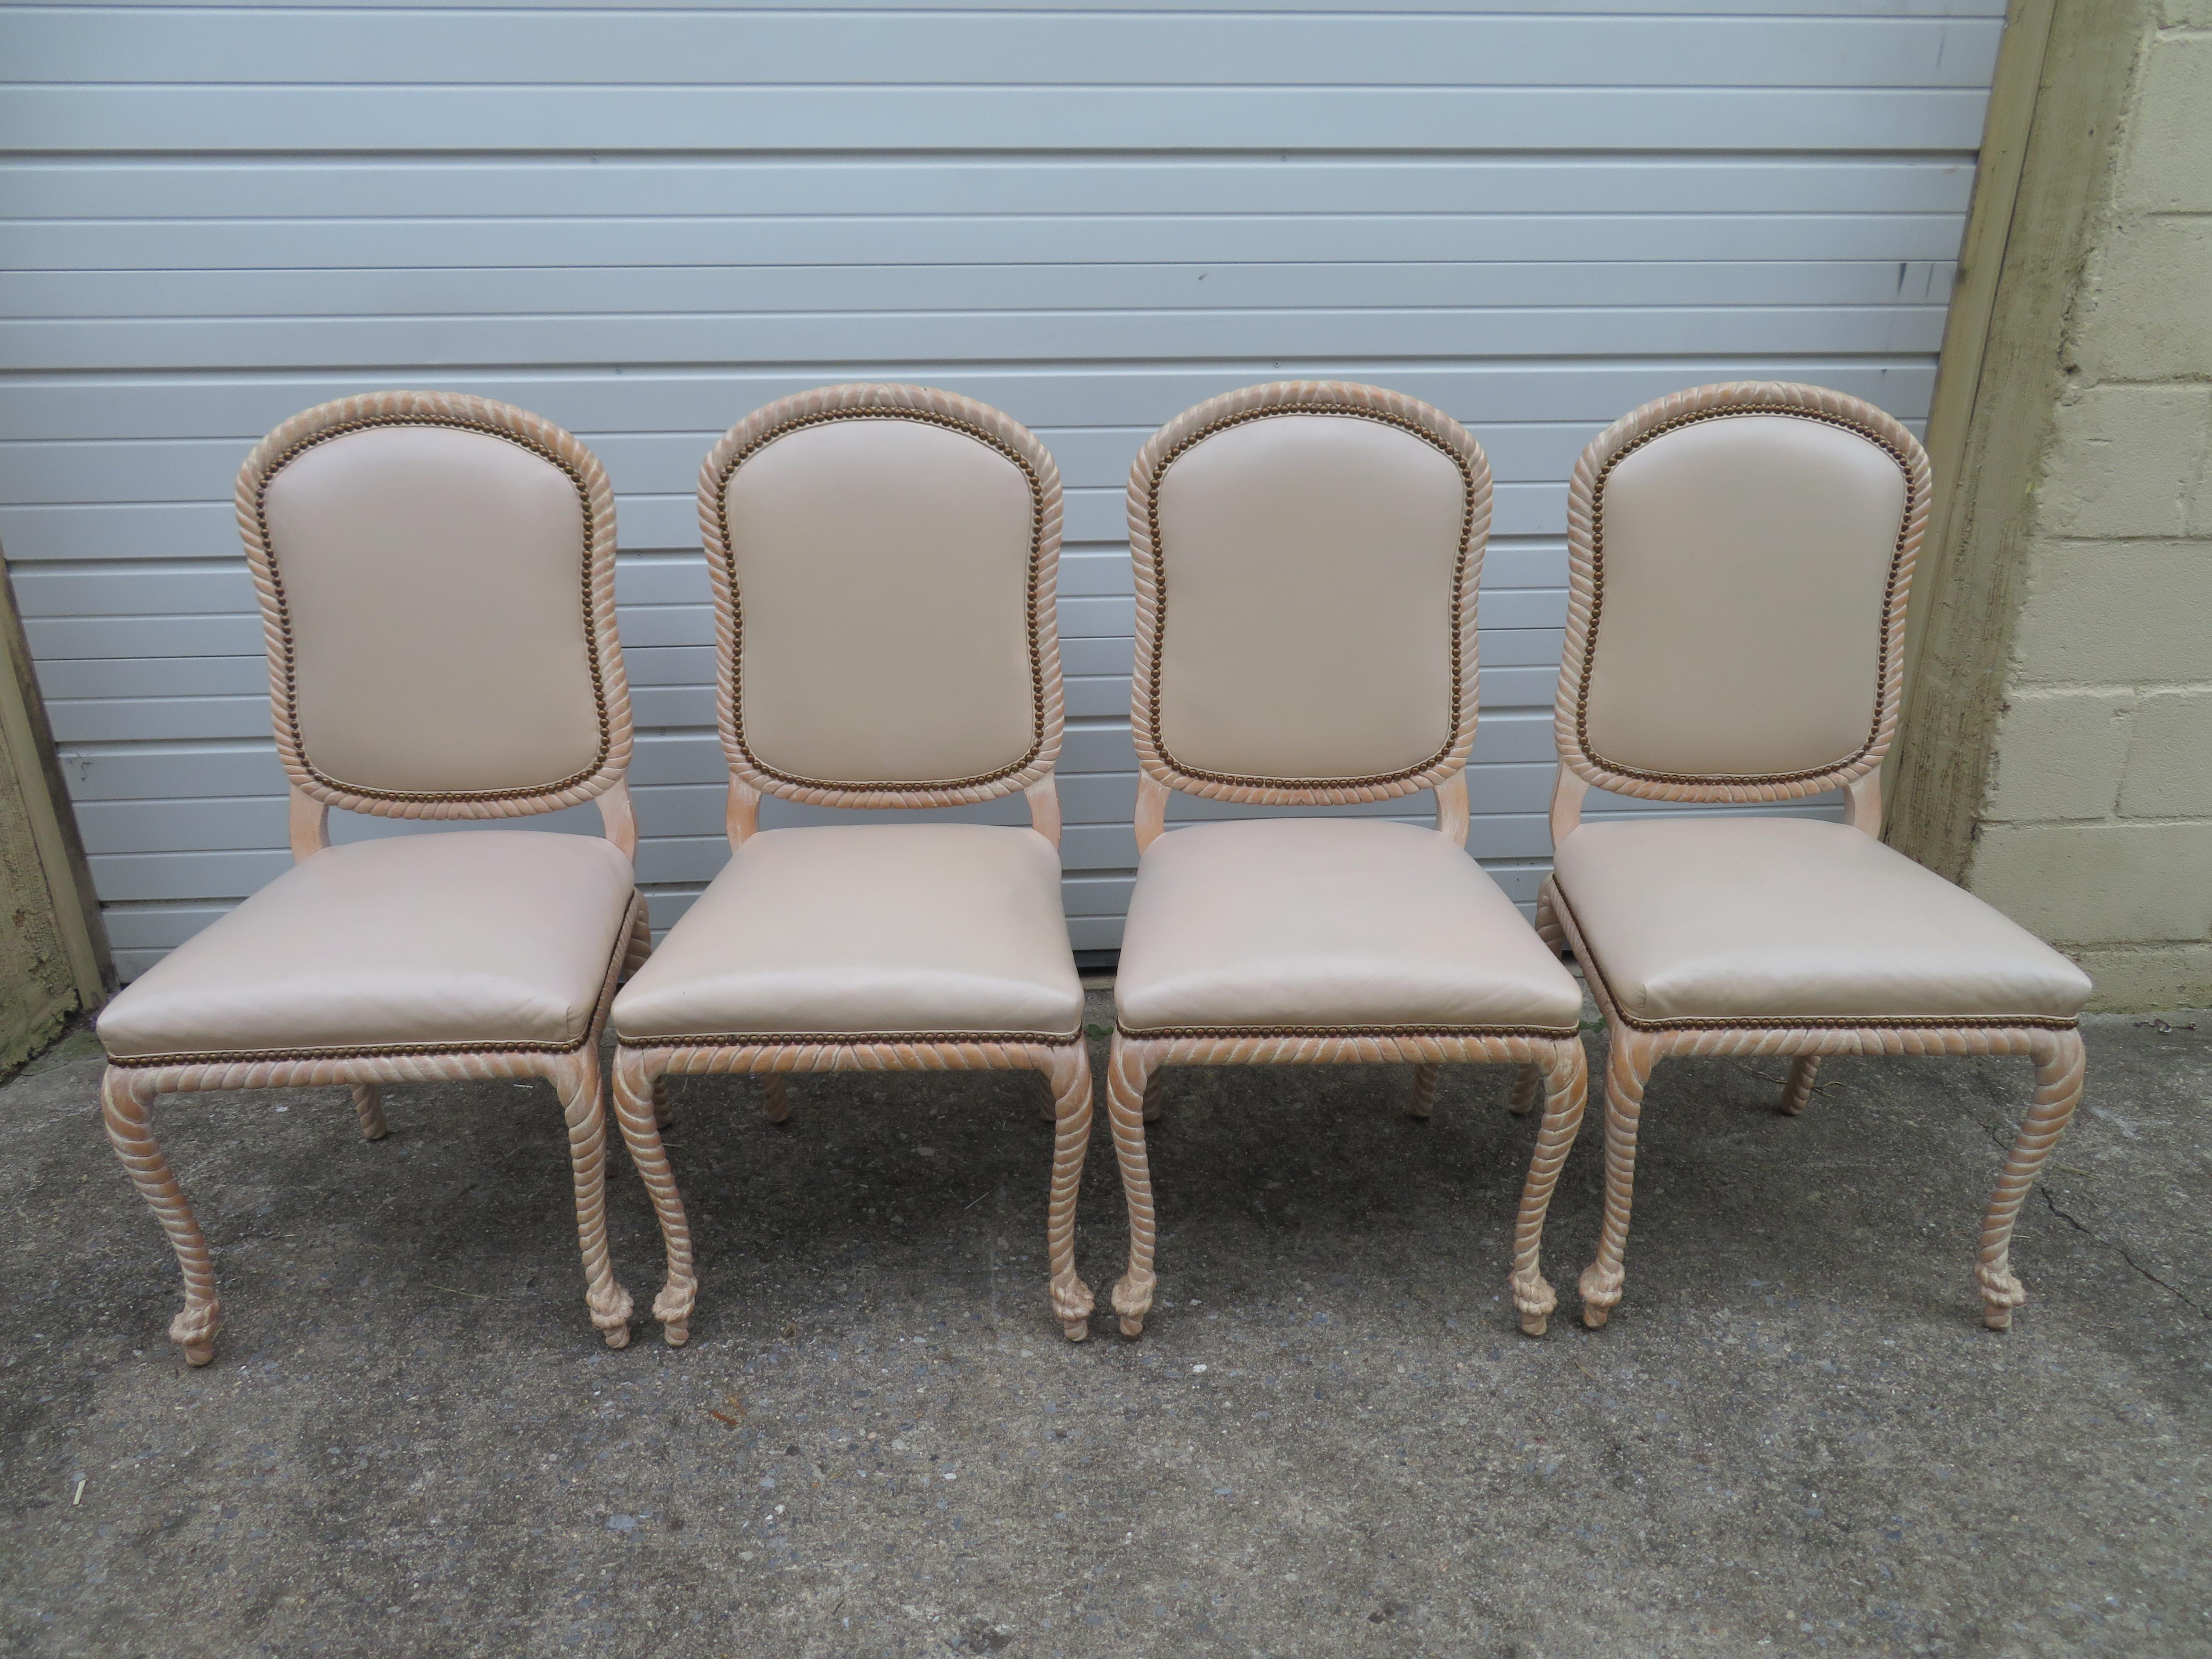 Lovely Set of 4 Vintage Carved Rope Dining Chairs Mid-Century Modern For Sale 6